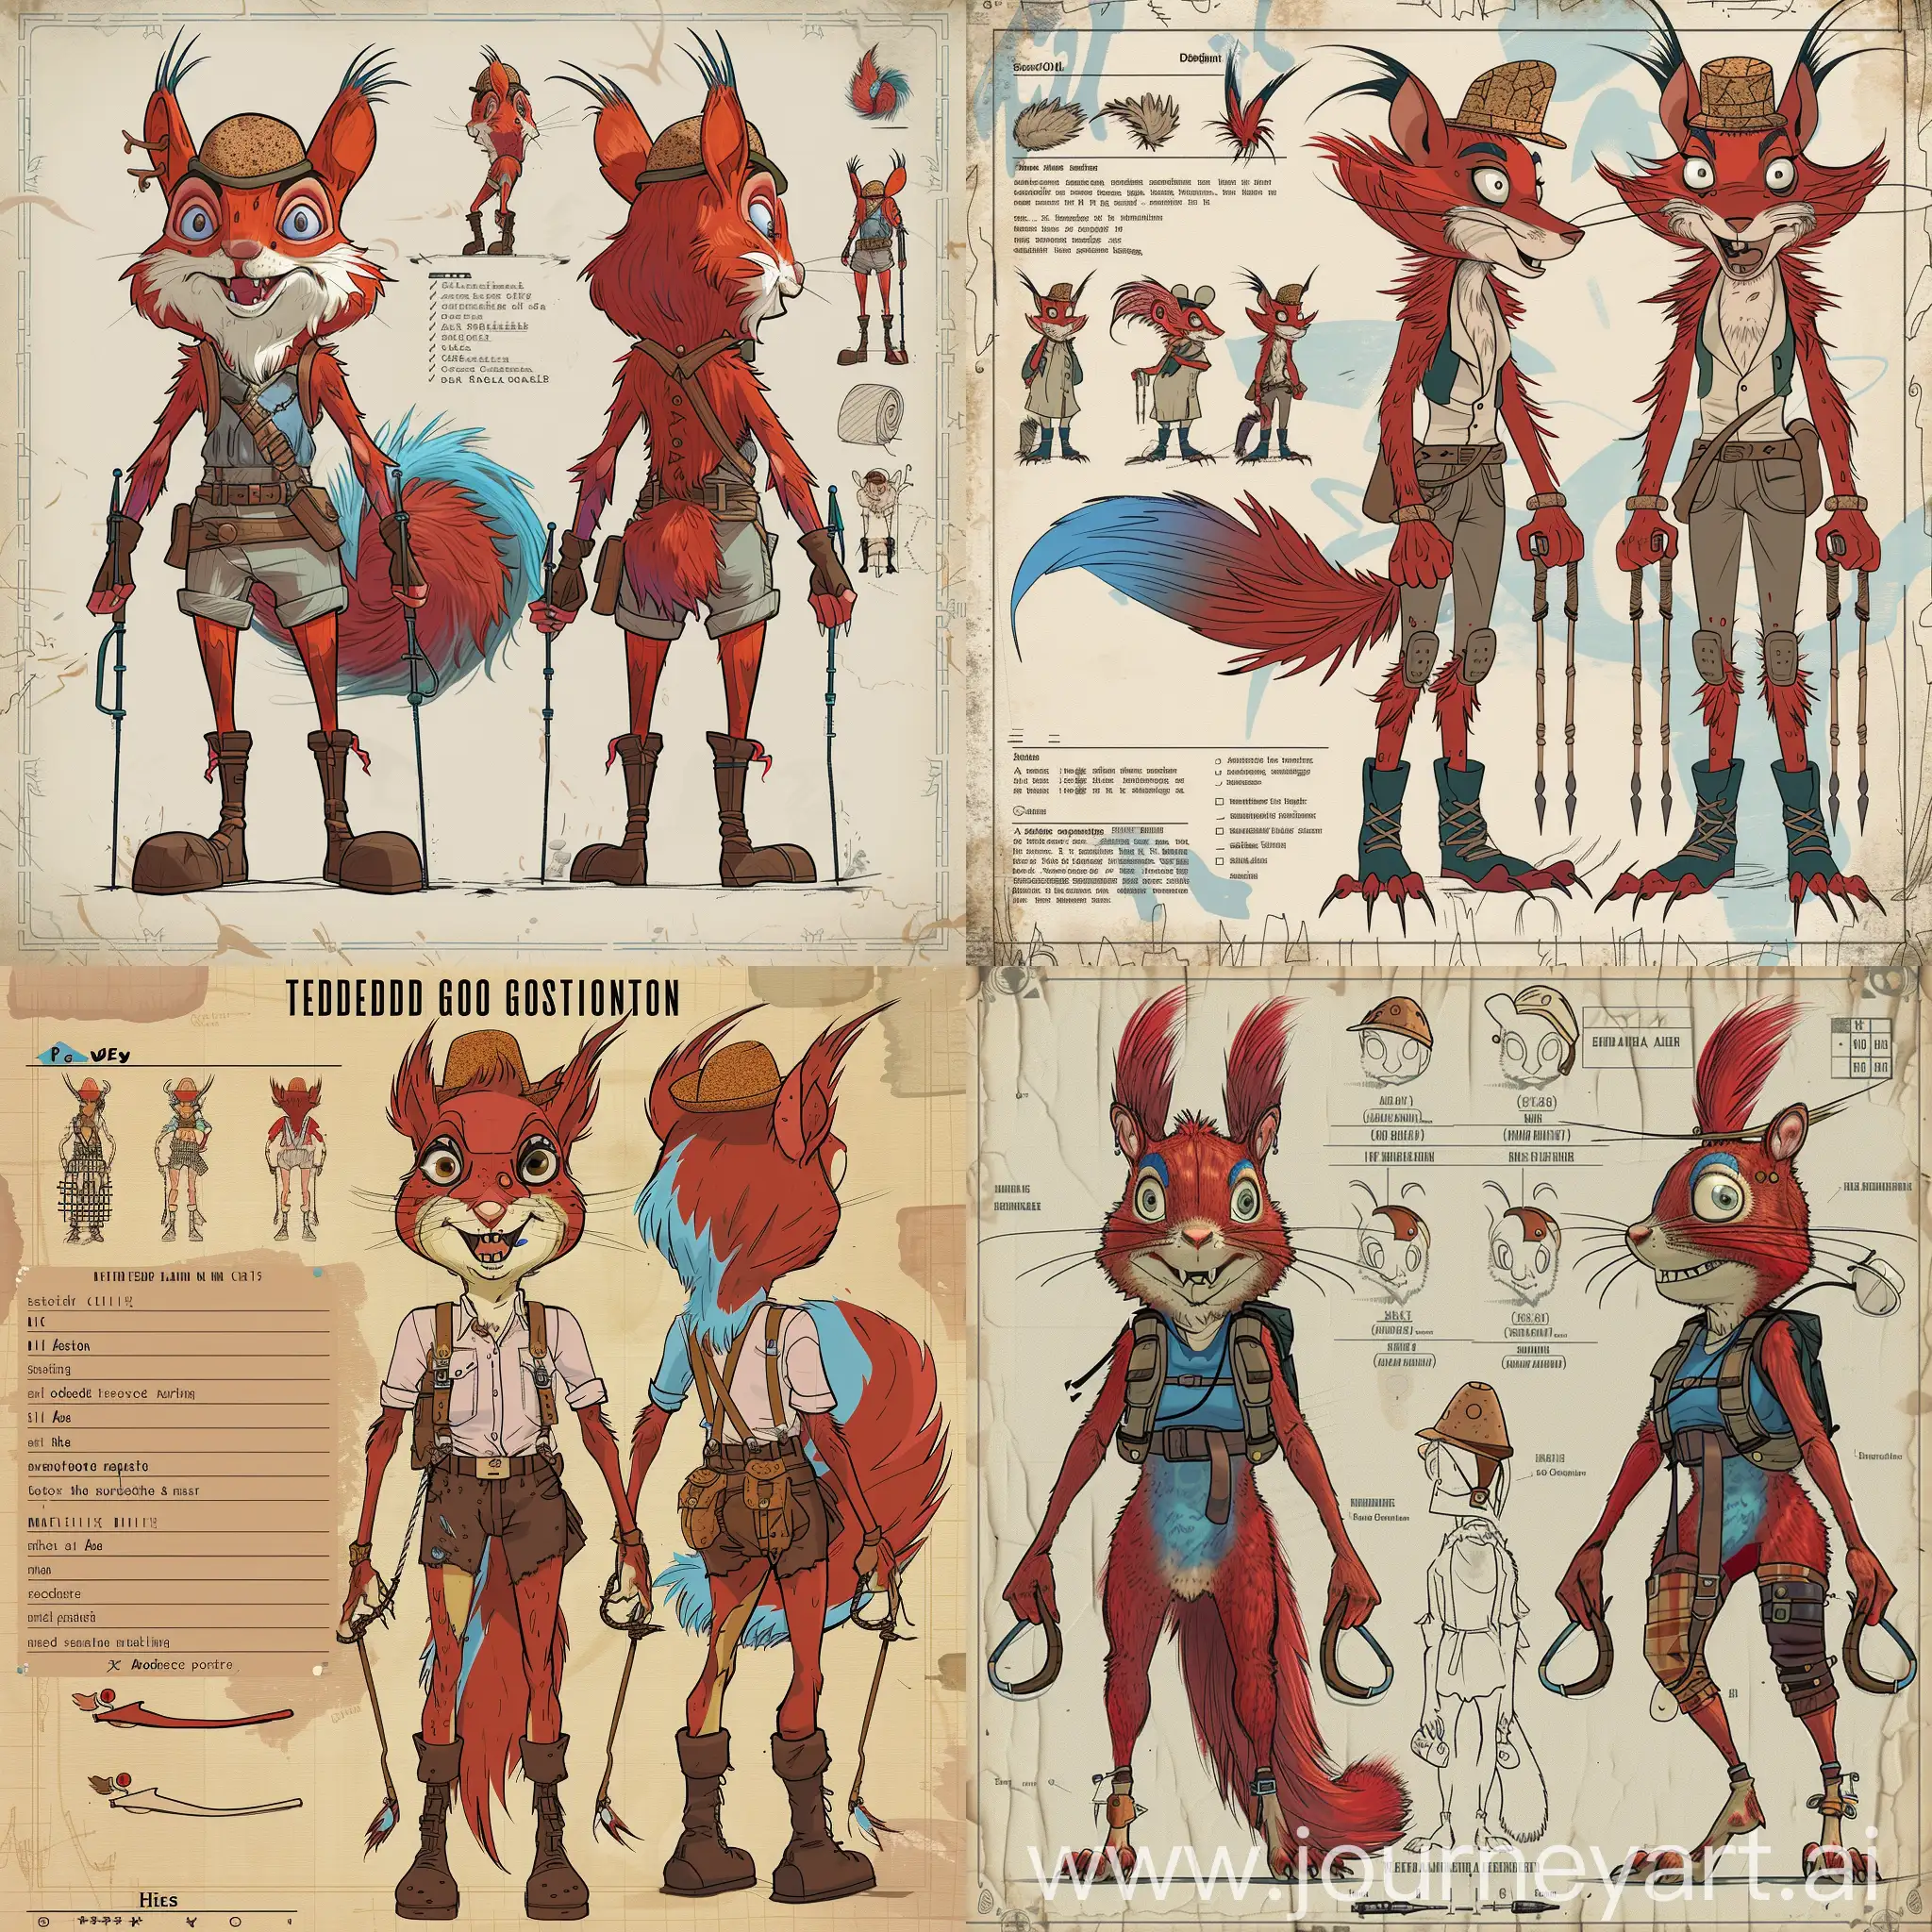 A character design sheet with technical specifications, front and back view and left and right, A tall fluffy squirrel with thin paws and handles and red fur with a blue sheen, crazy eyes and a crooked smile, dressed in hiking clothes and high boots, a cork hat on her head., A game character design in the style of Edward Gorey